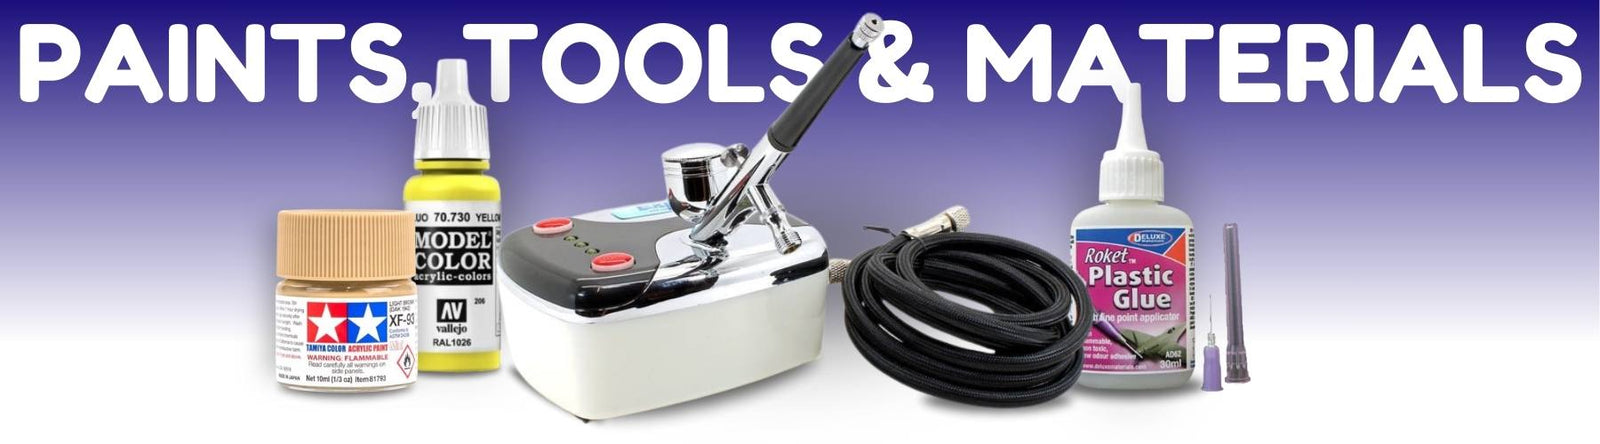 model paints, tools and materials including mr hobby, vallejo, and humbrol